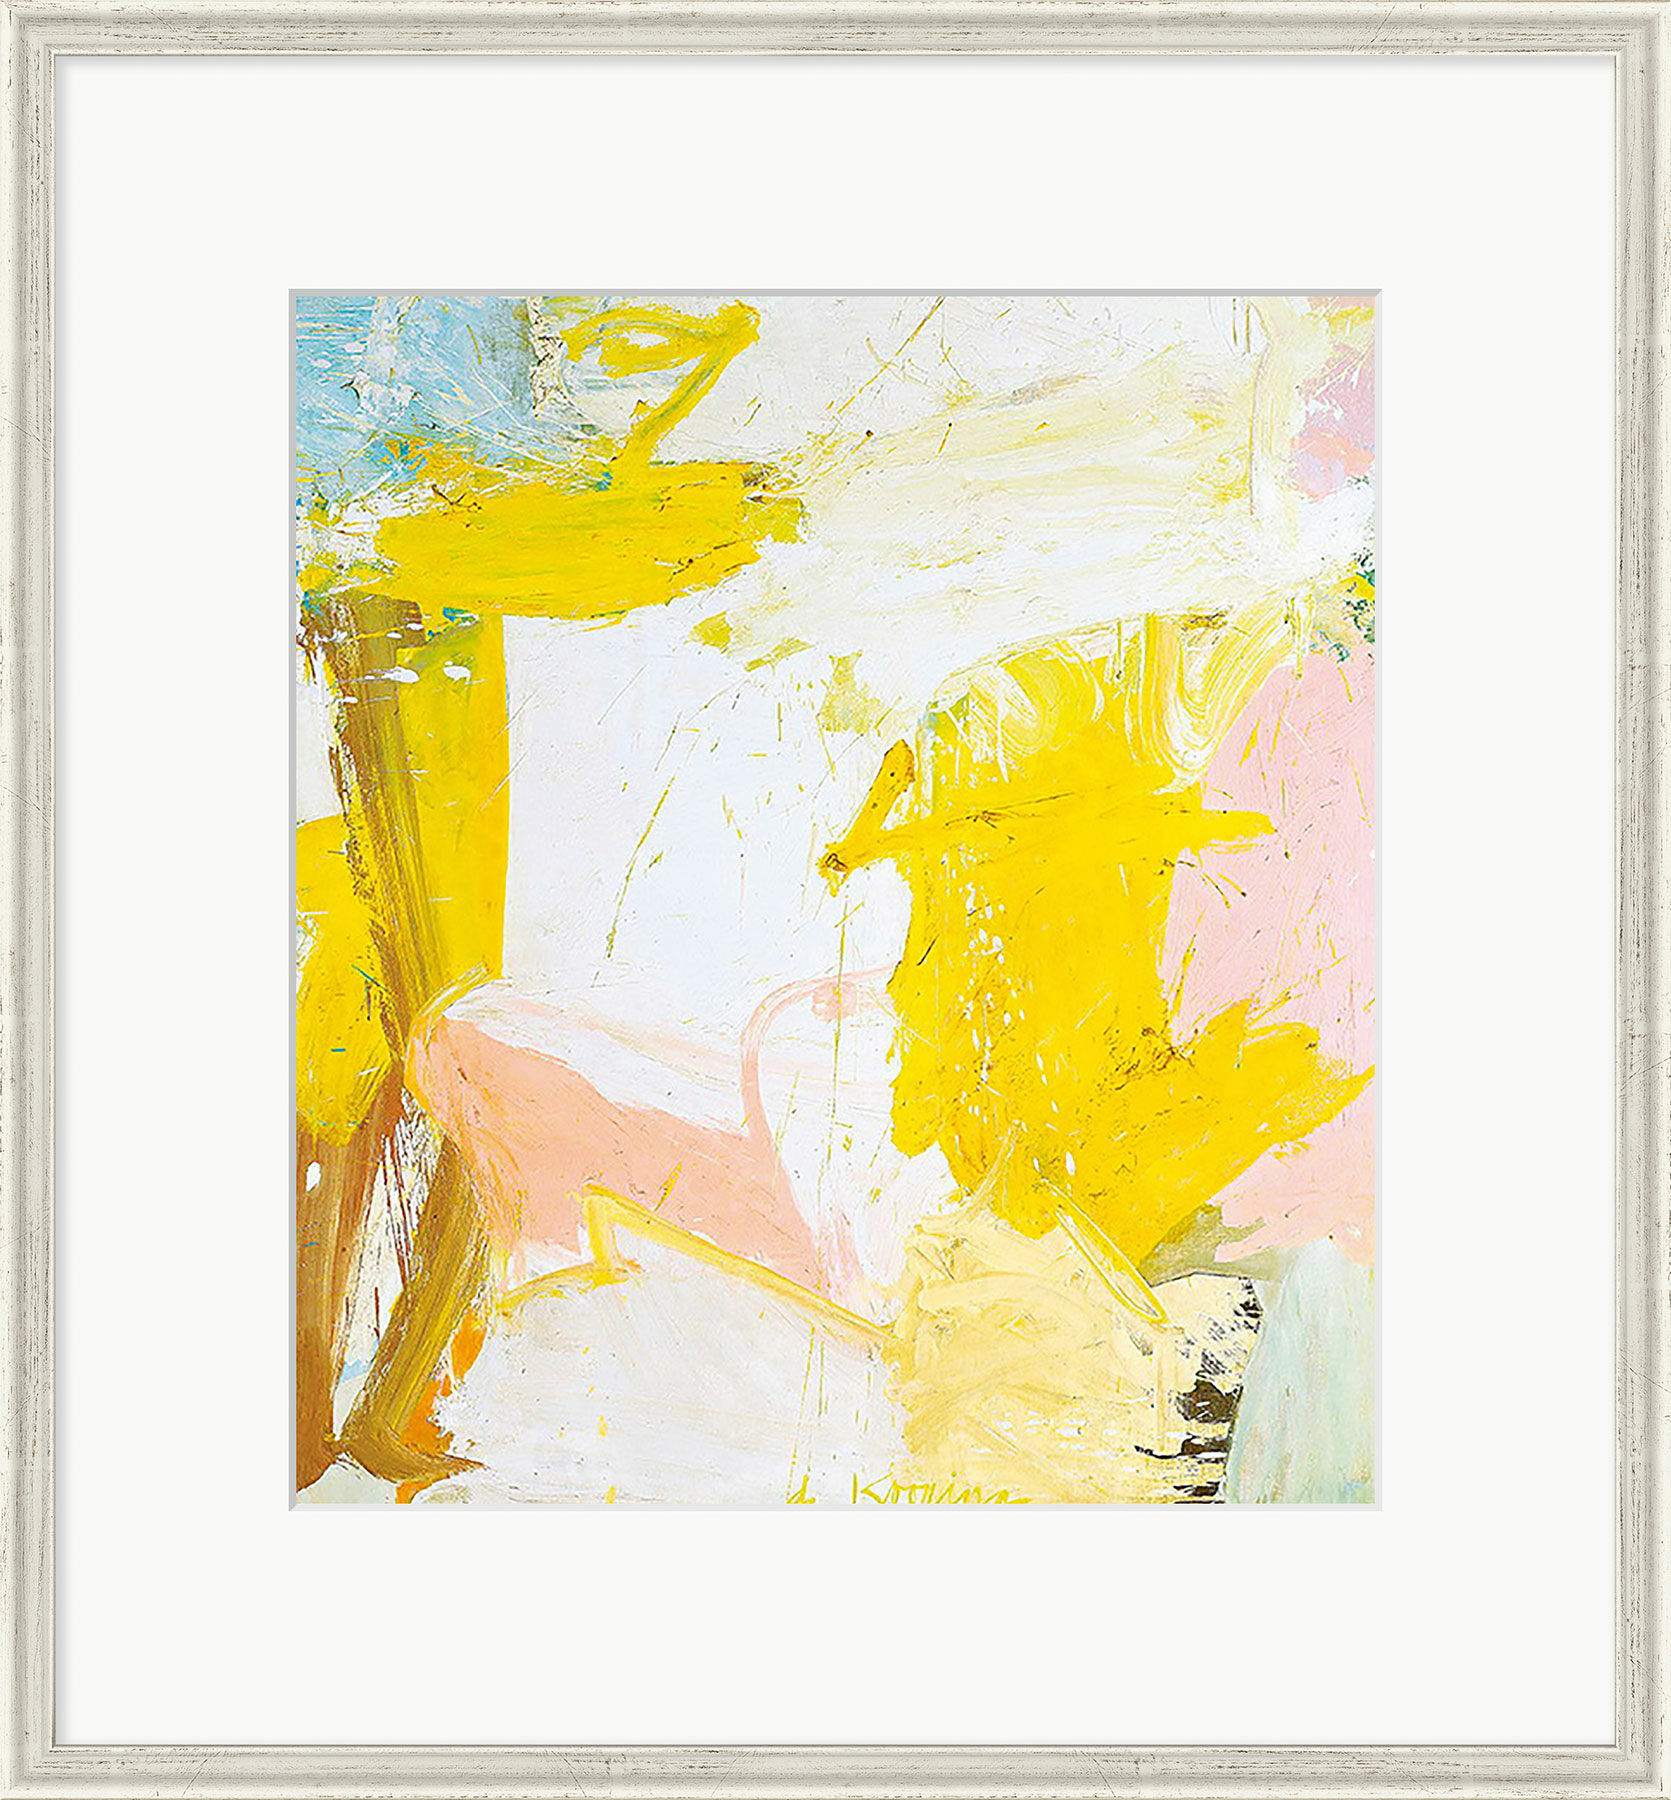 Picture "Rosy-Fingered Dawn at Louse Point" (1963), framed by Willem de Kooning